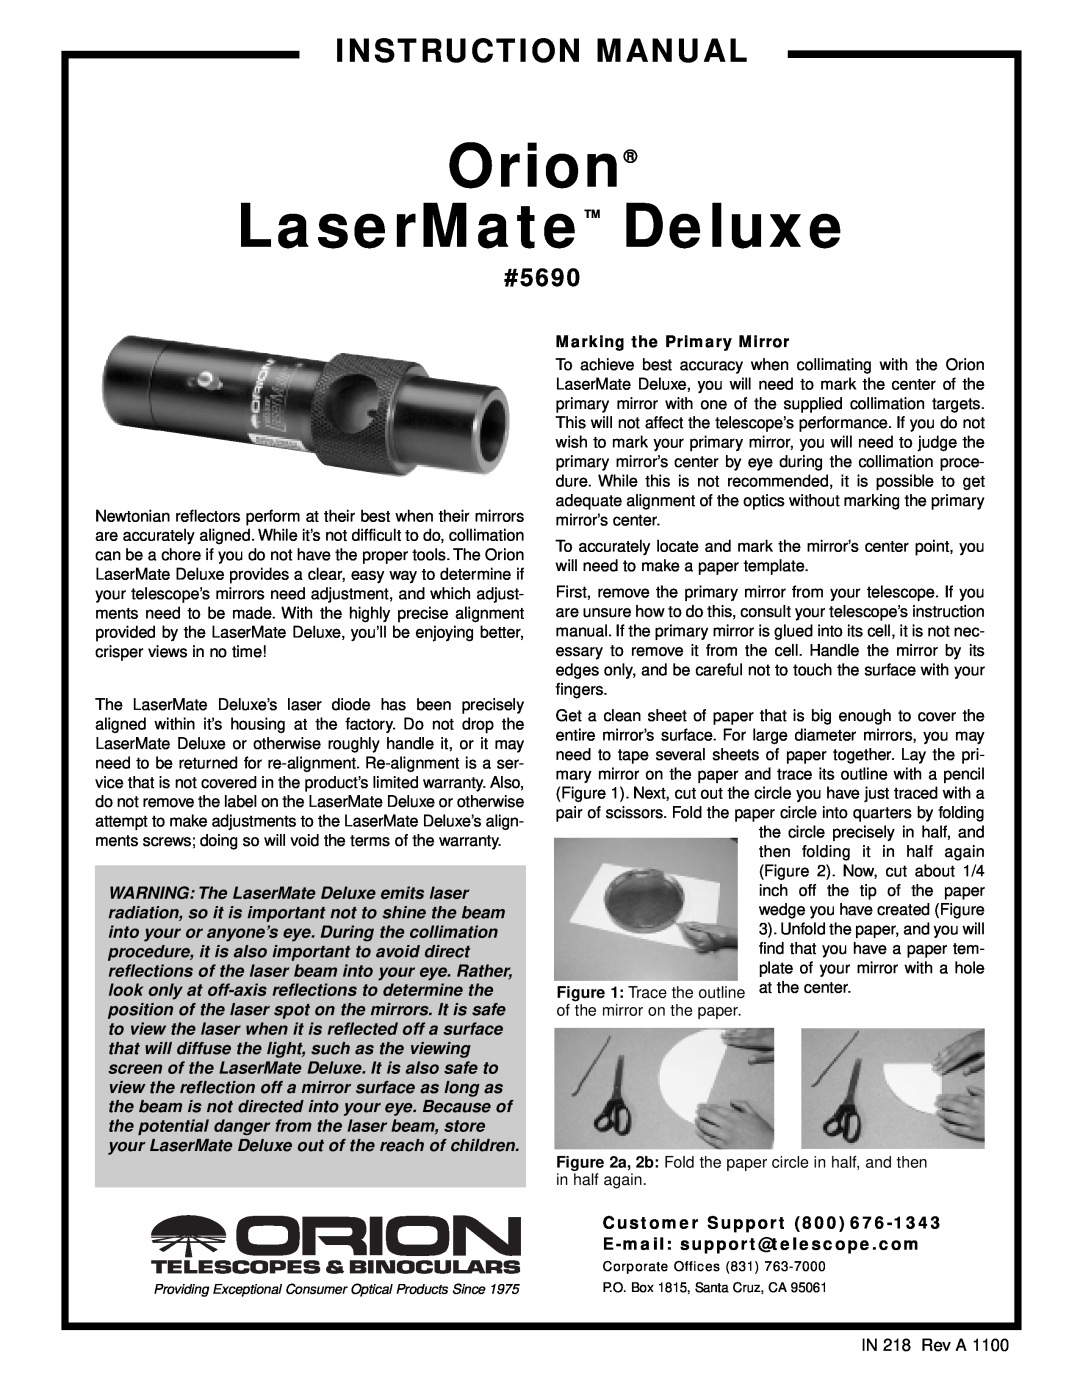 Orion Orion LaserMate Deluxe instruction manual Customer Support 800, E-mail support@telescope.com, Instruction Manual 